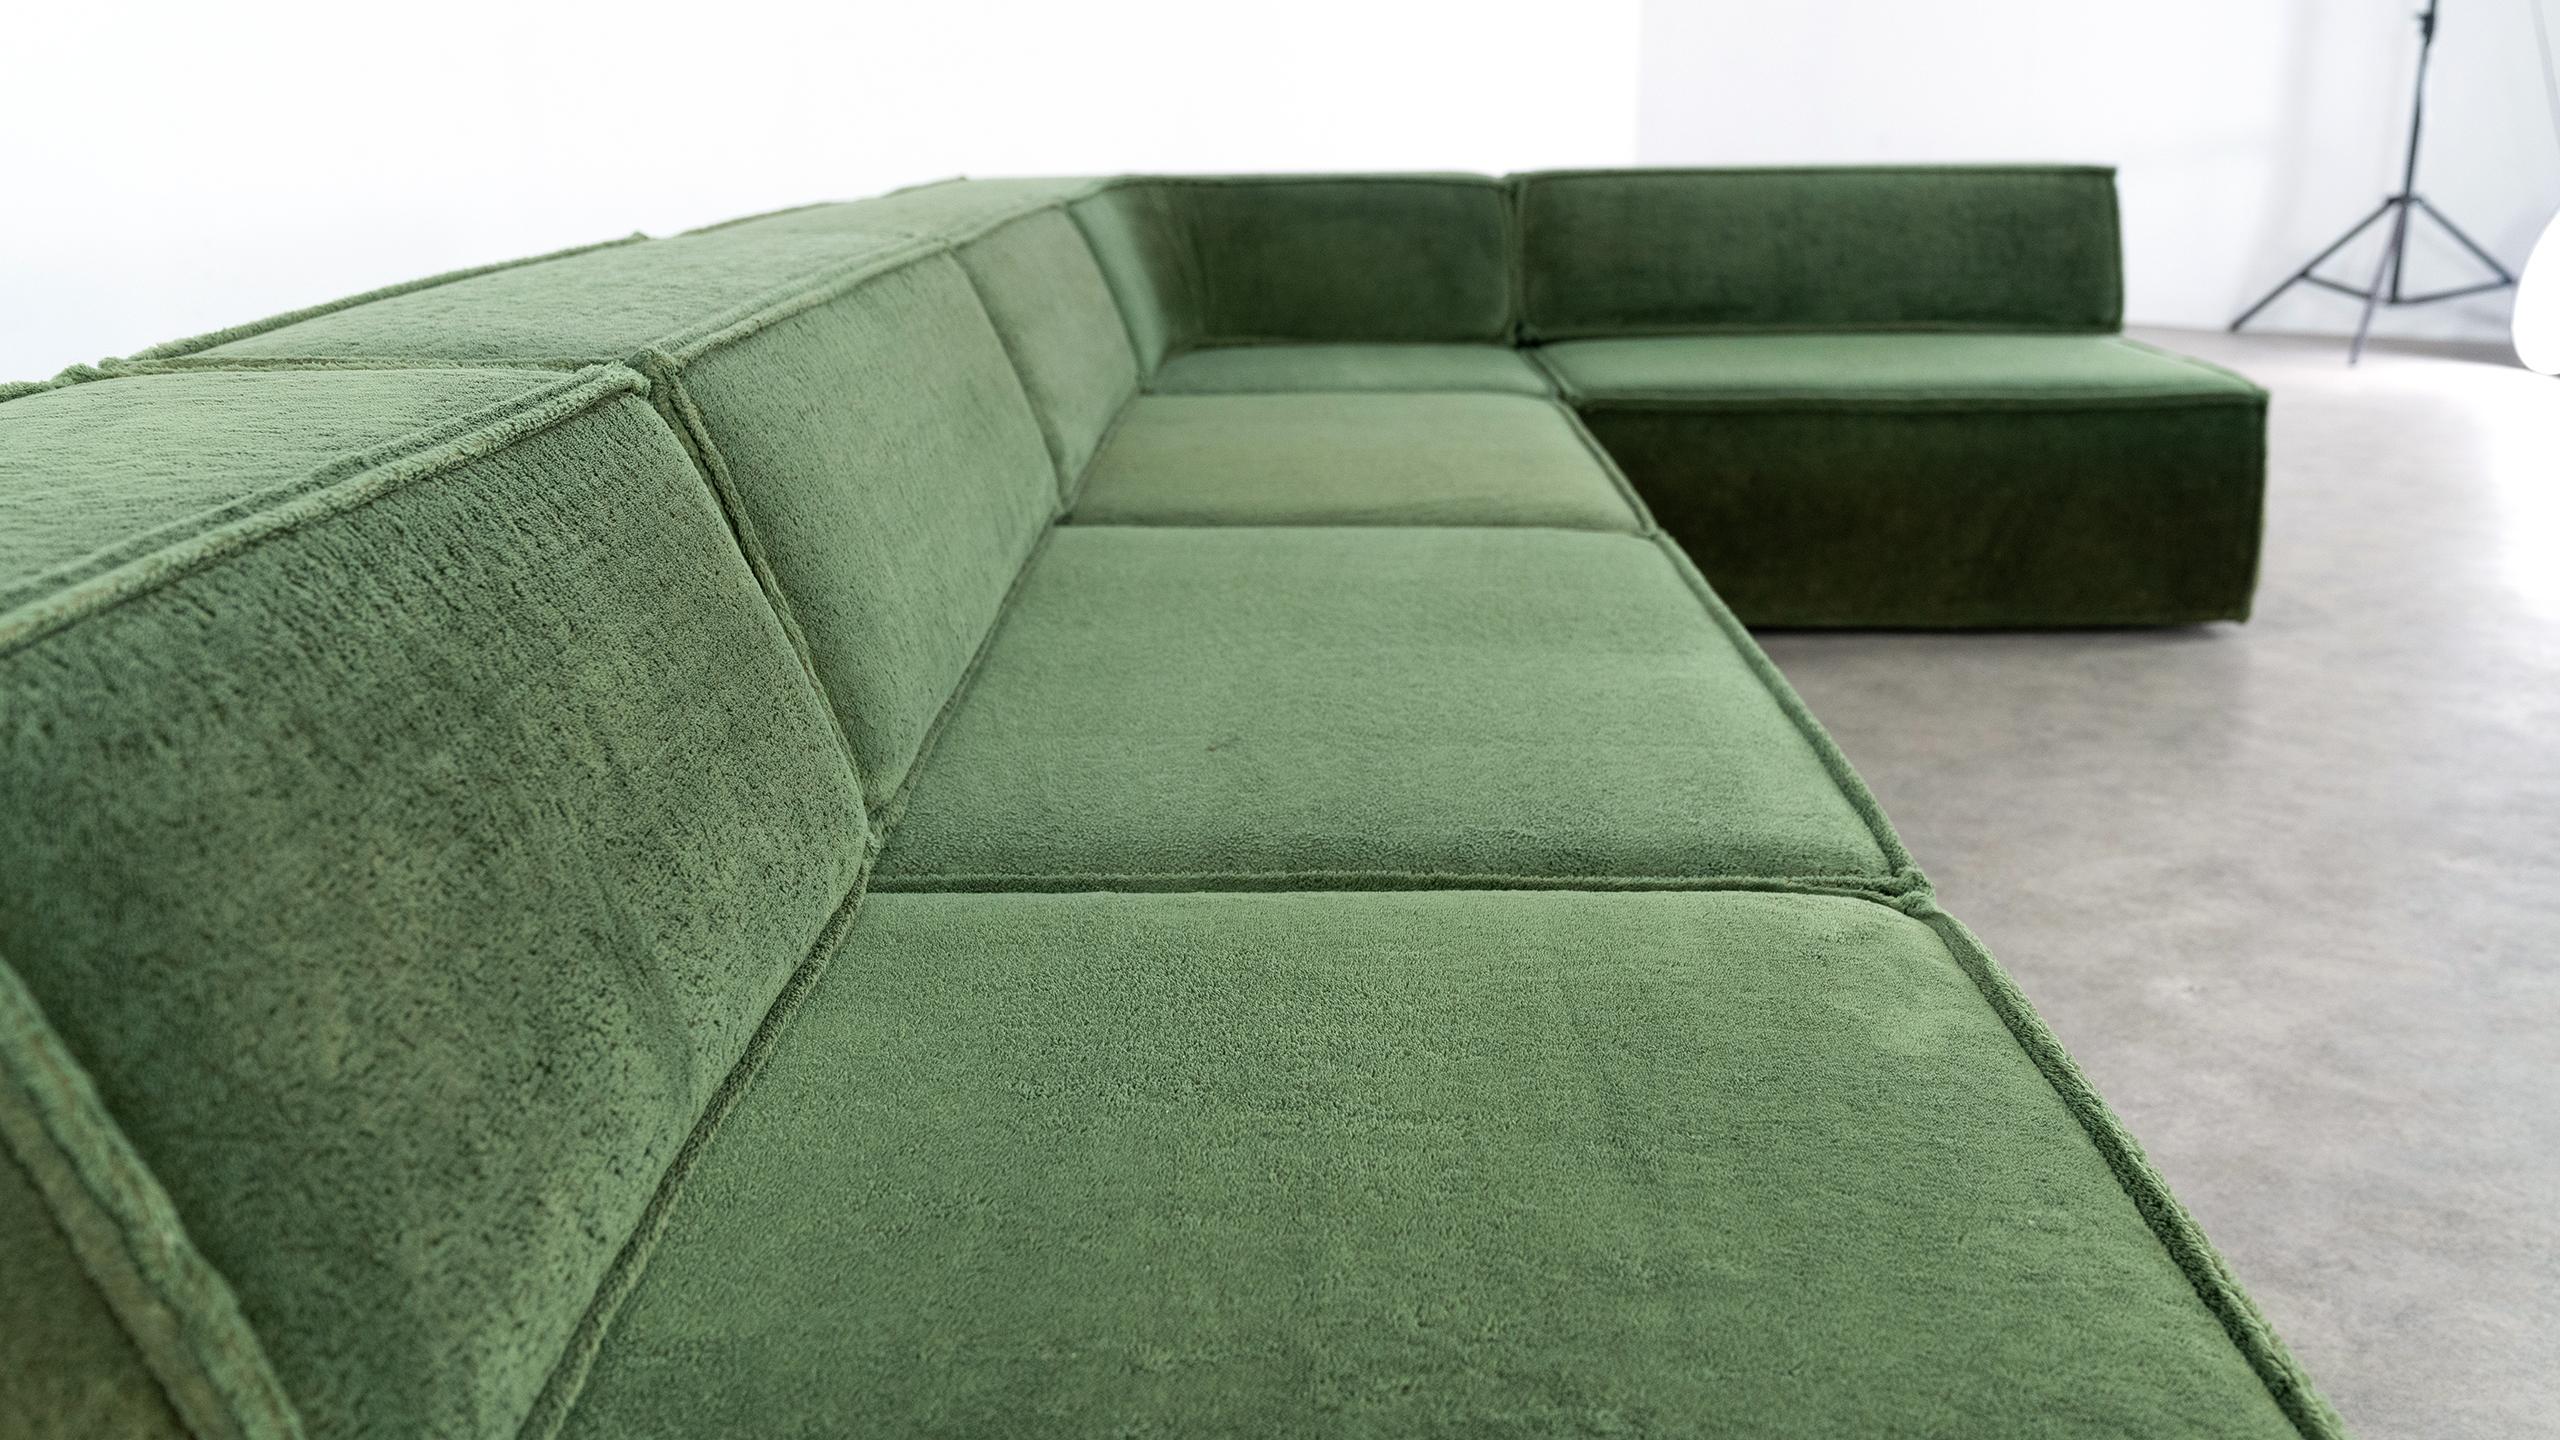 COR Trio Modular Sofa, Giant Landscape in Green, 1972 by Team Form AG, Swiss 8